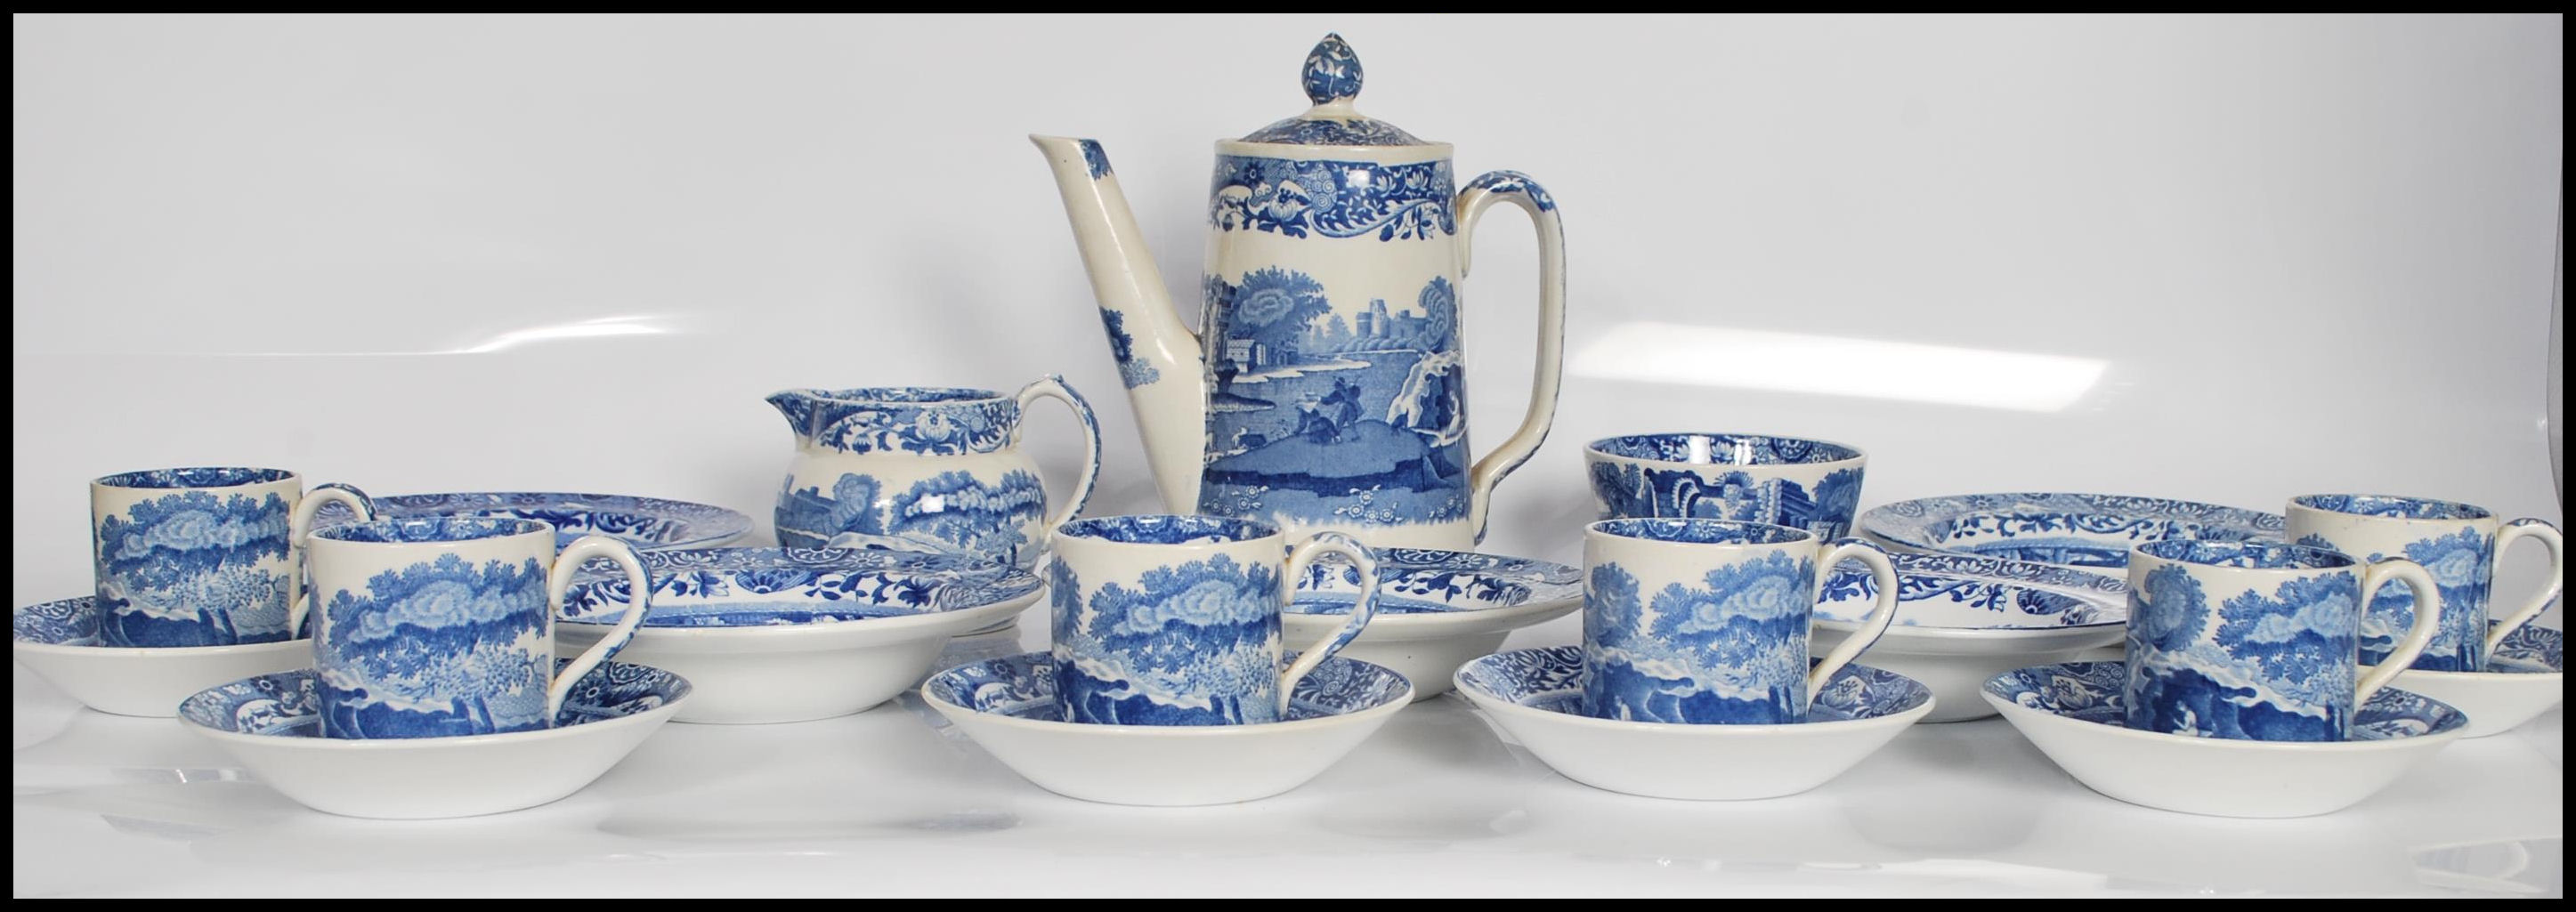 A mid 20th Century Copeland and Spode coffee services in the transfer printed Italian pattern